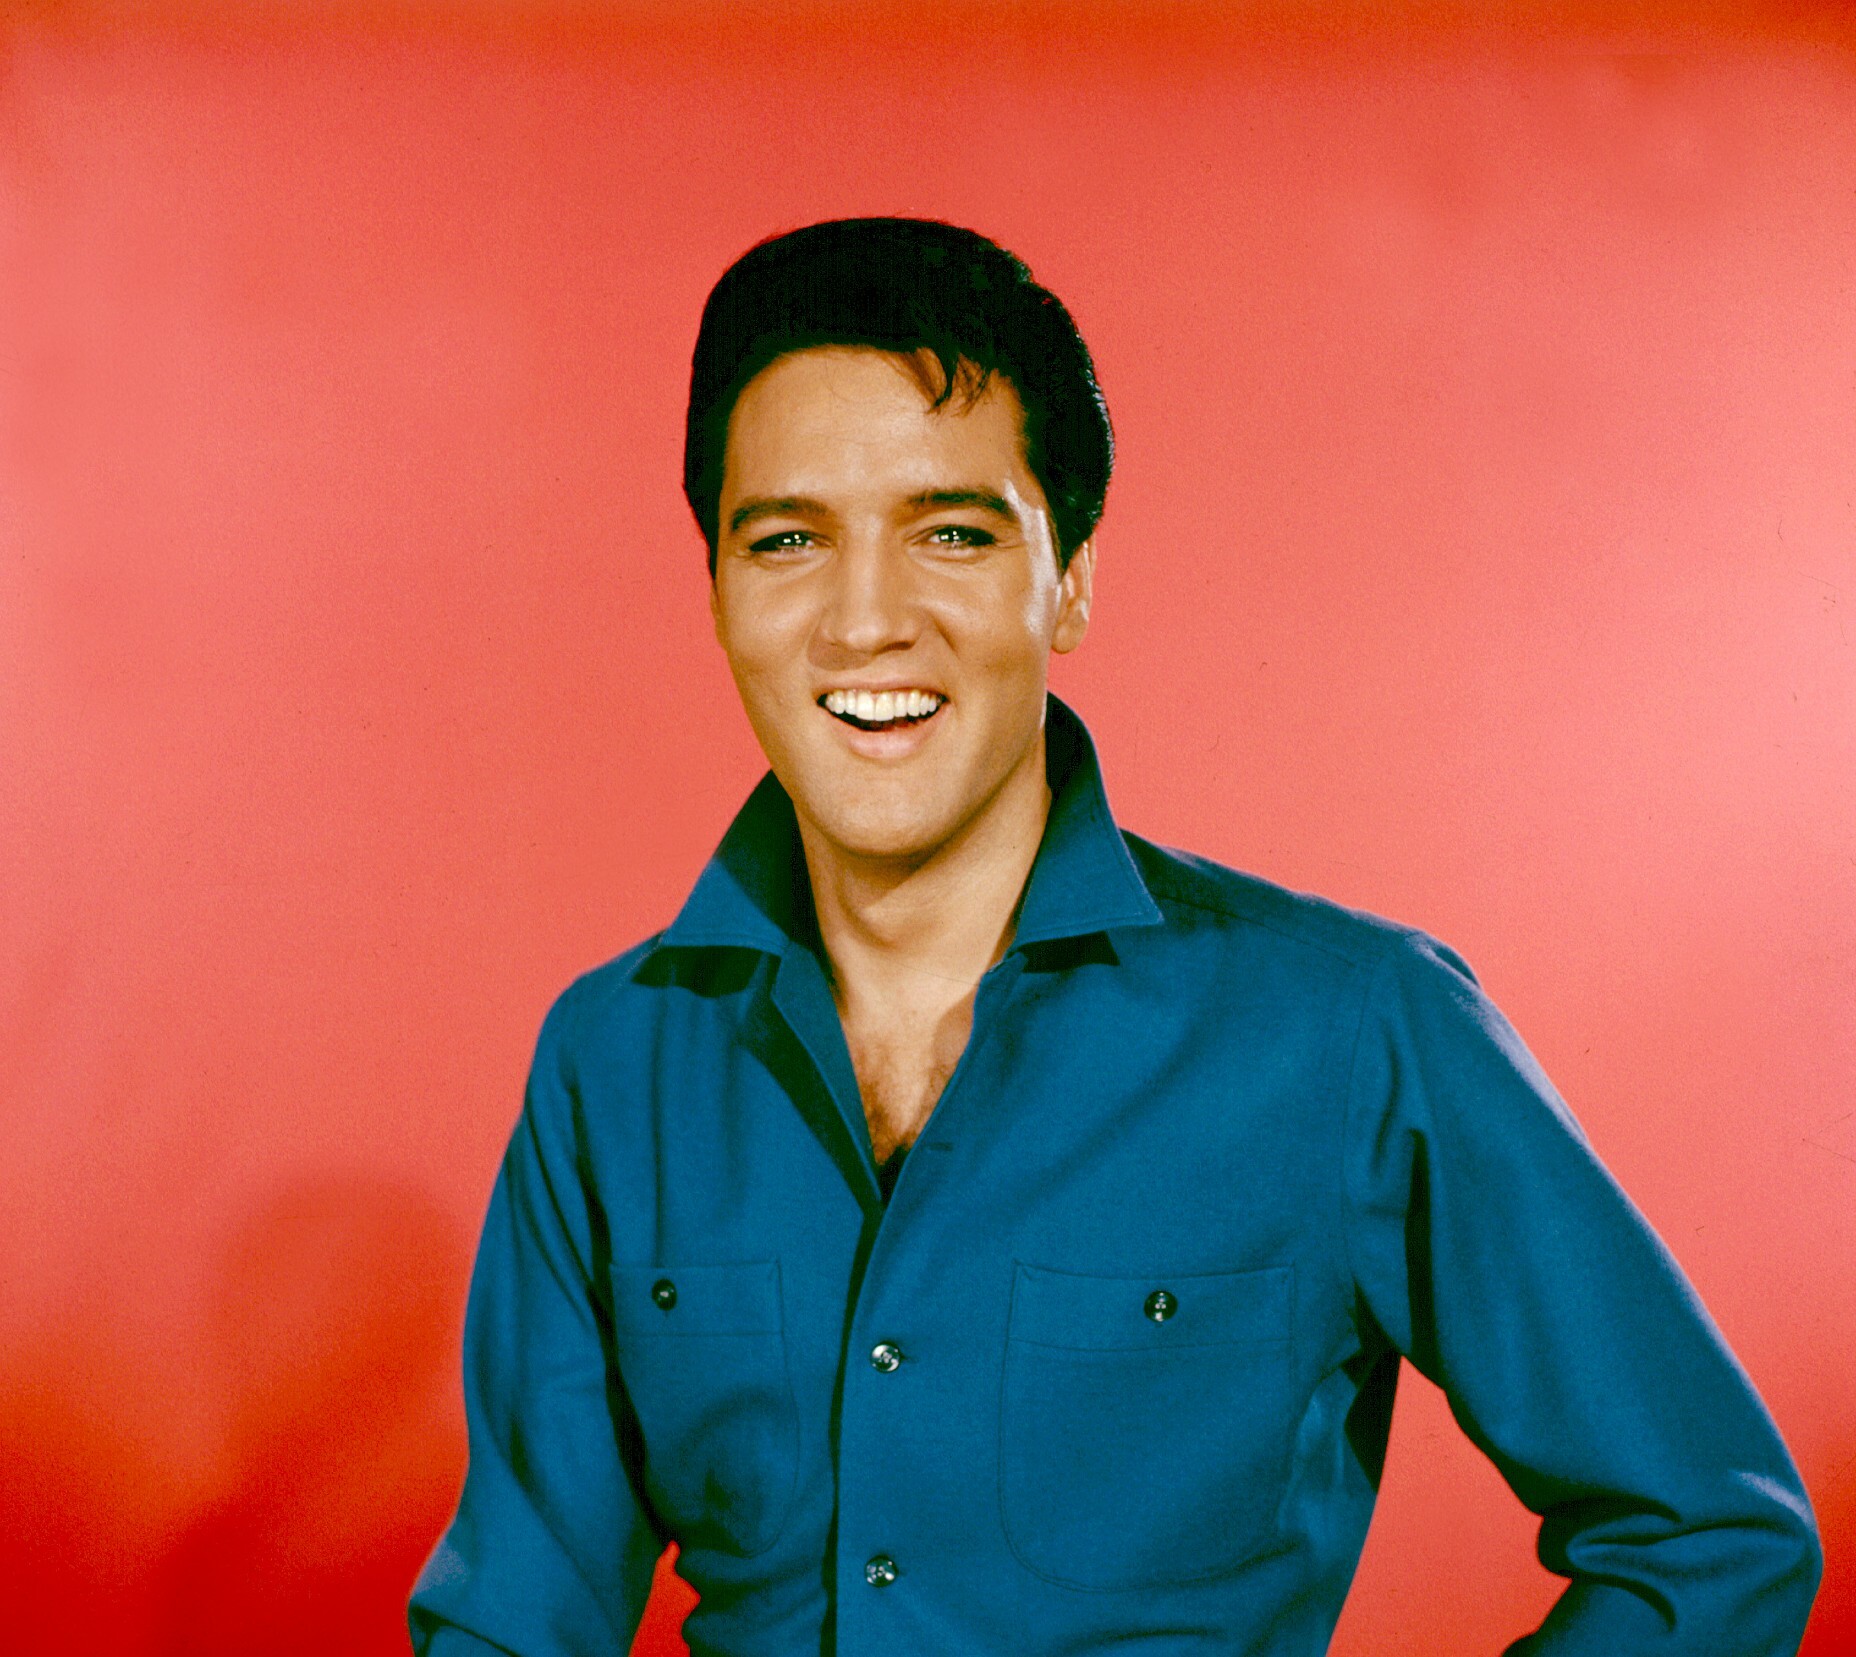 elvis-presley-will-return-to-life-this-year-as-an-ai-powered-immersive-concert-experience